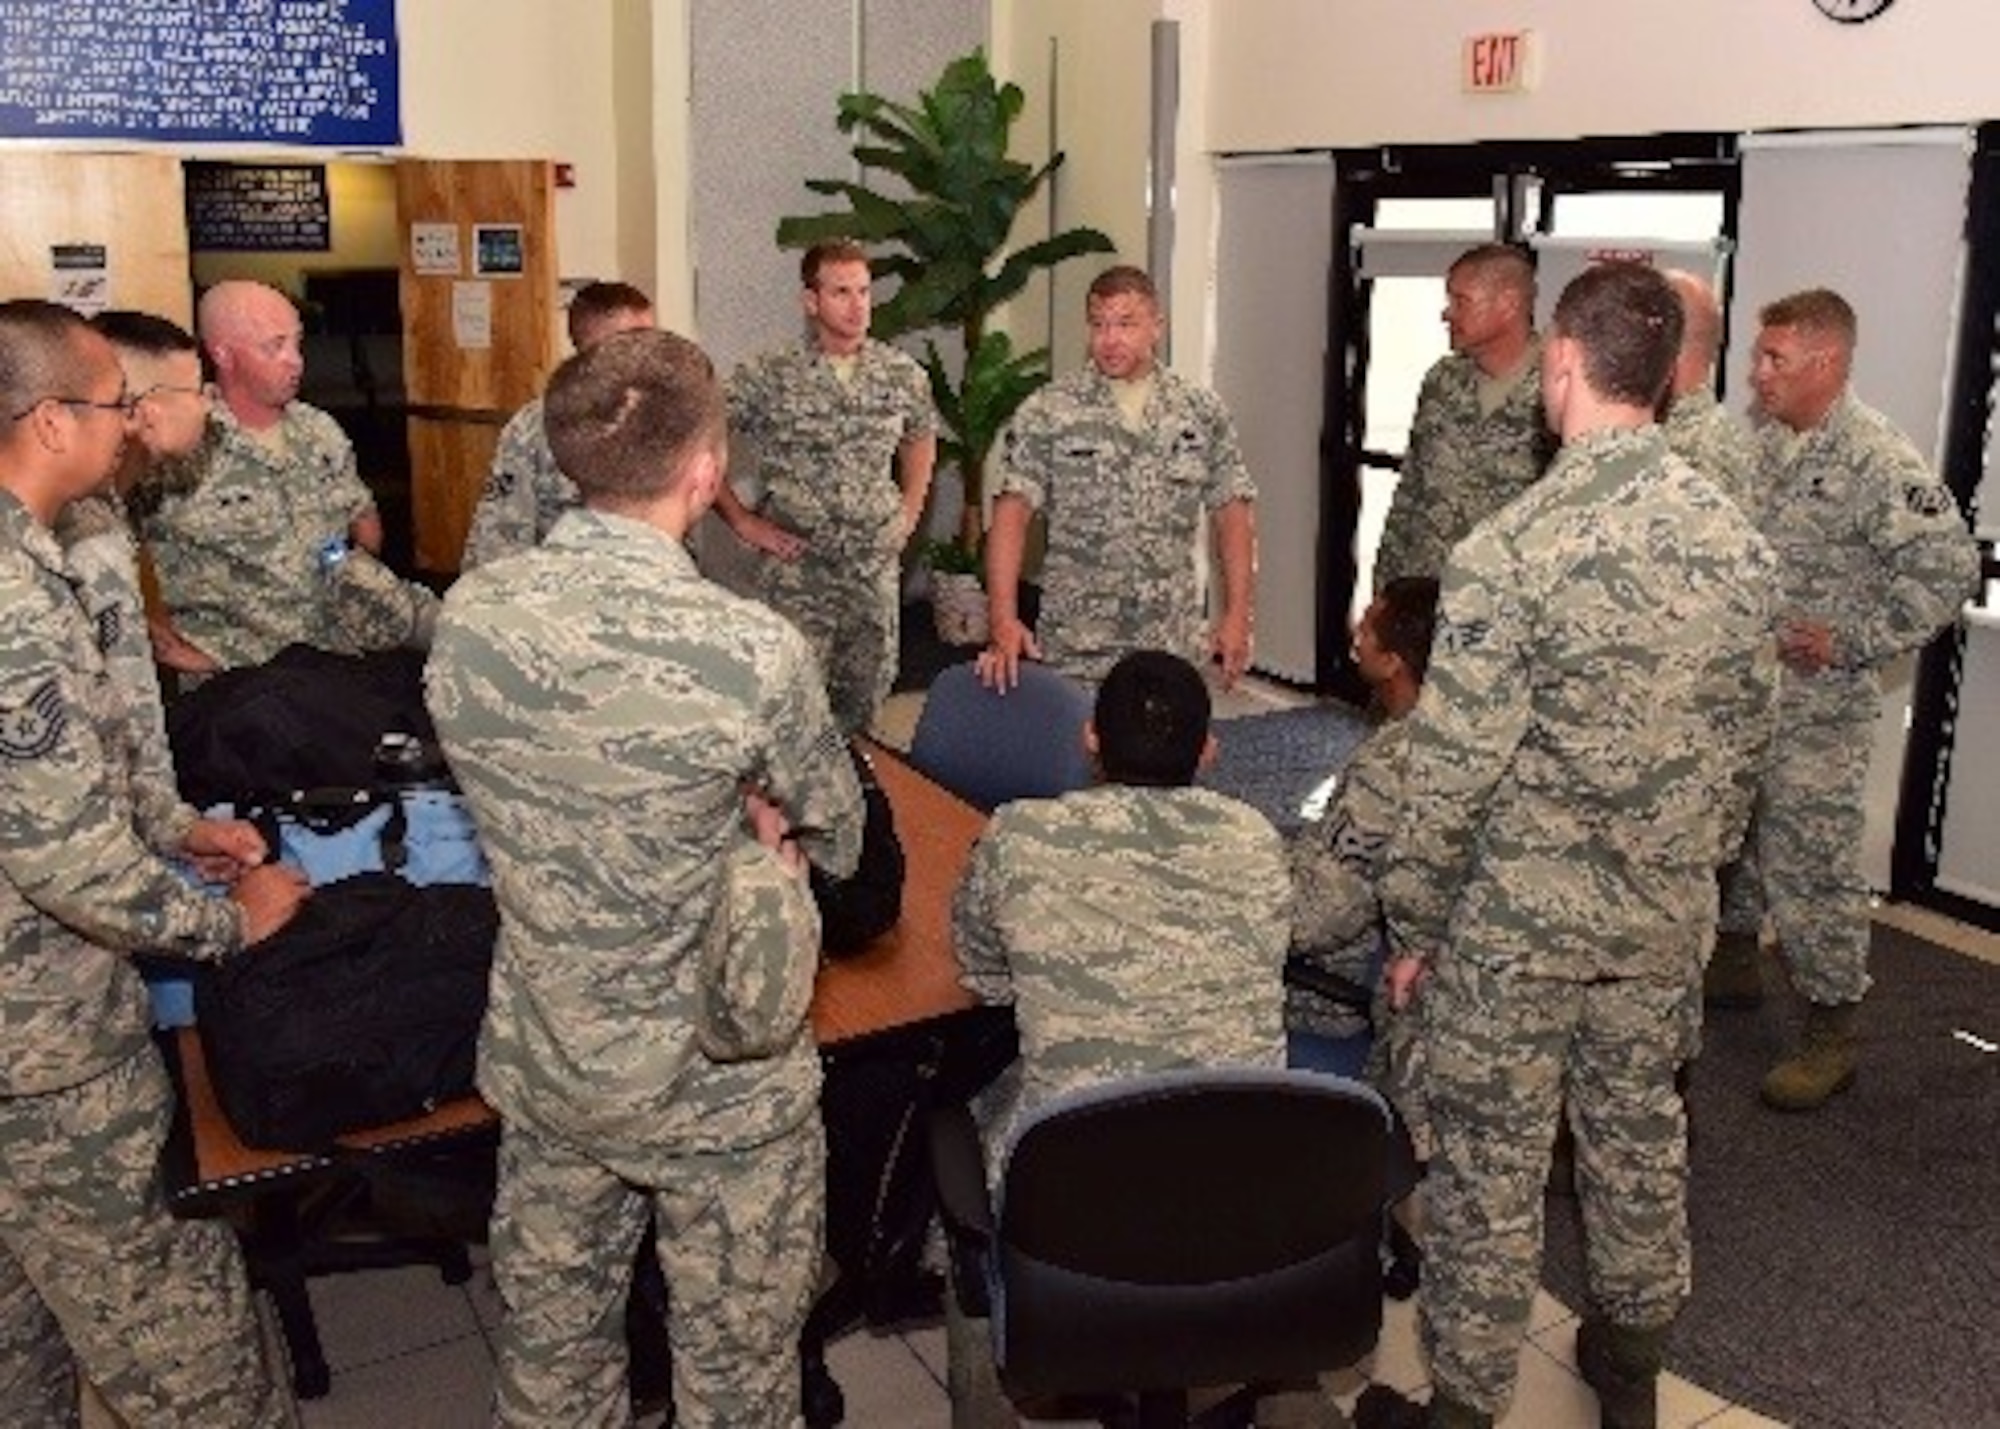 Chief Master Sgt. Jamie Cornelia, 924th Maintenance Squadron, talks to newly arriving Airmen from Davis-Monthan Air Force Base, Ariz. to Patrick Air Force Base, Fla., July 14 about scheduled events during their deployment. Citizen Airmen with the 924th Fighter Group, Davis-Monthan AFB and the 920th Rescue Wing at Patrick AFB, are training together to perfect skills needed during combat.